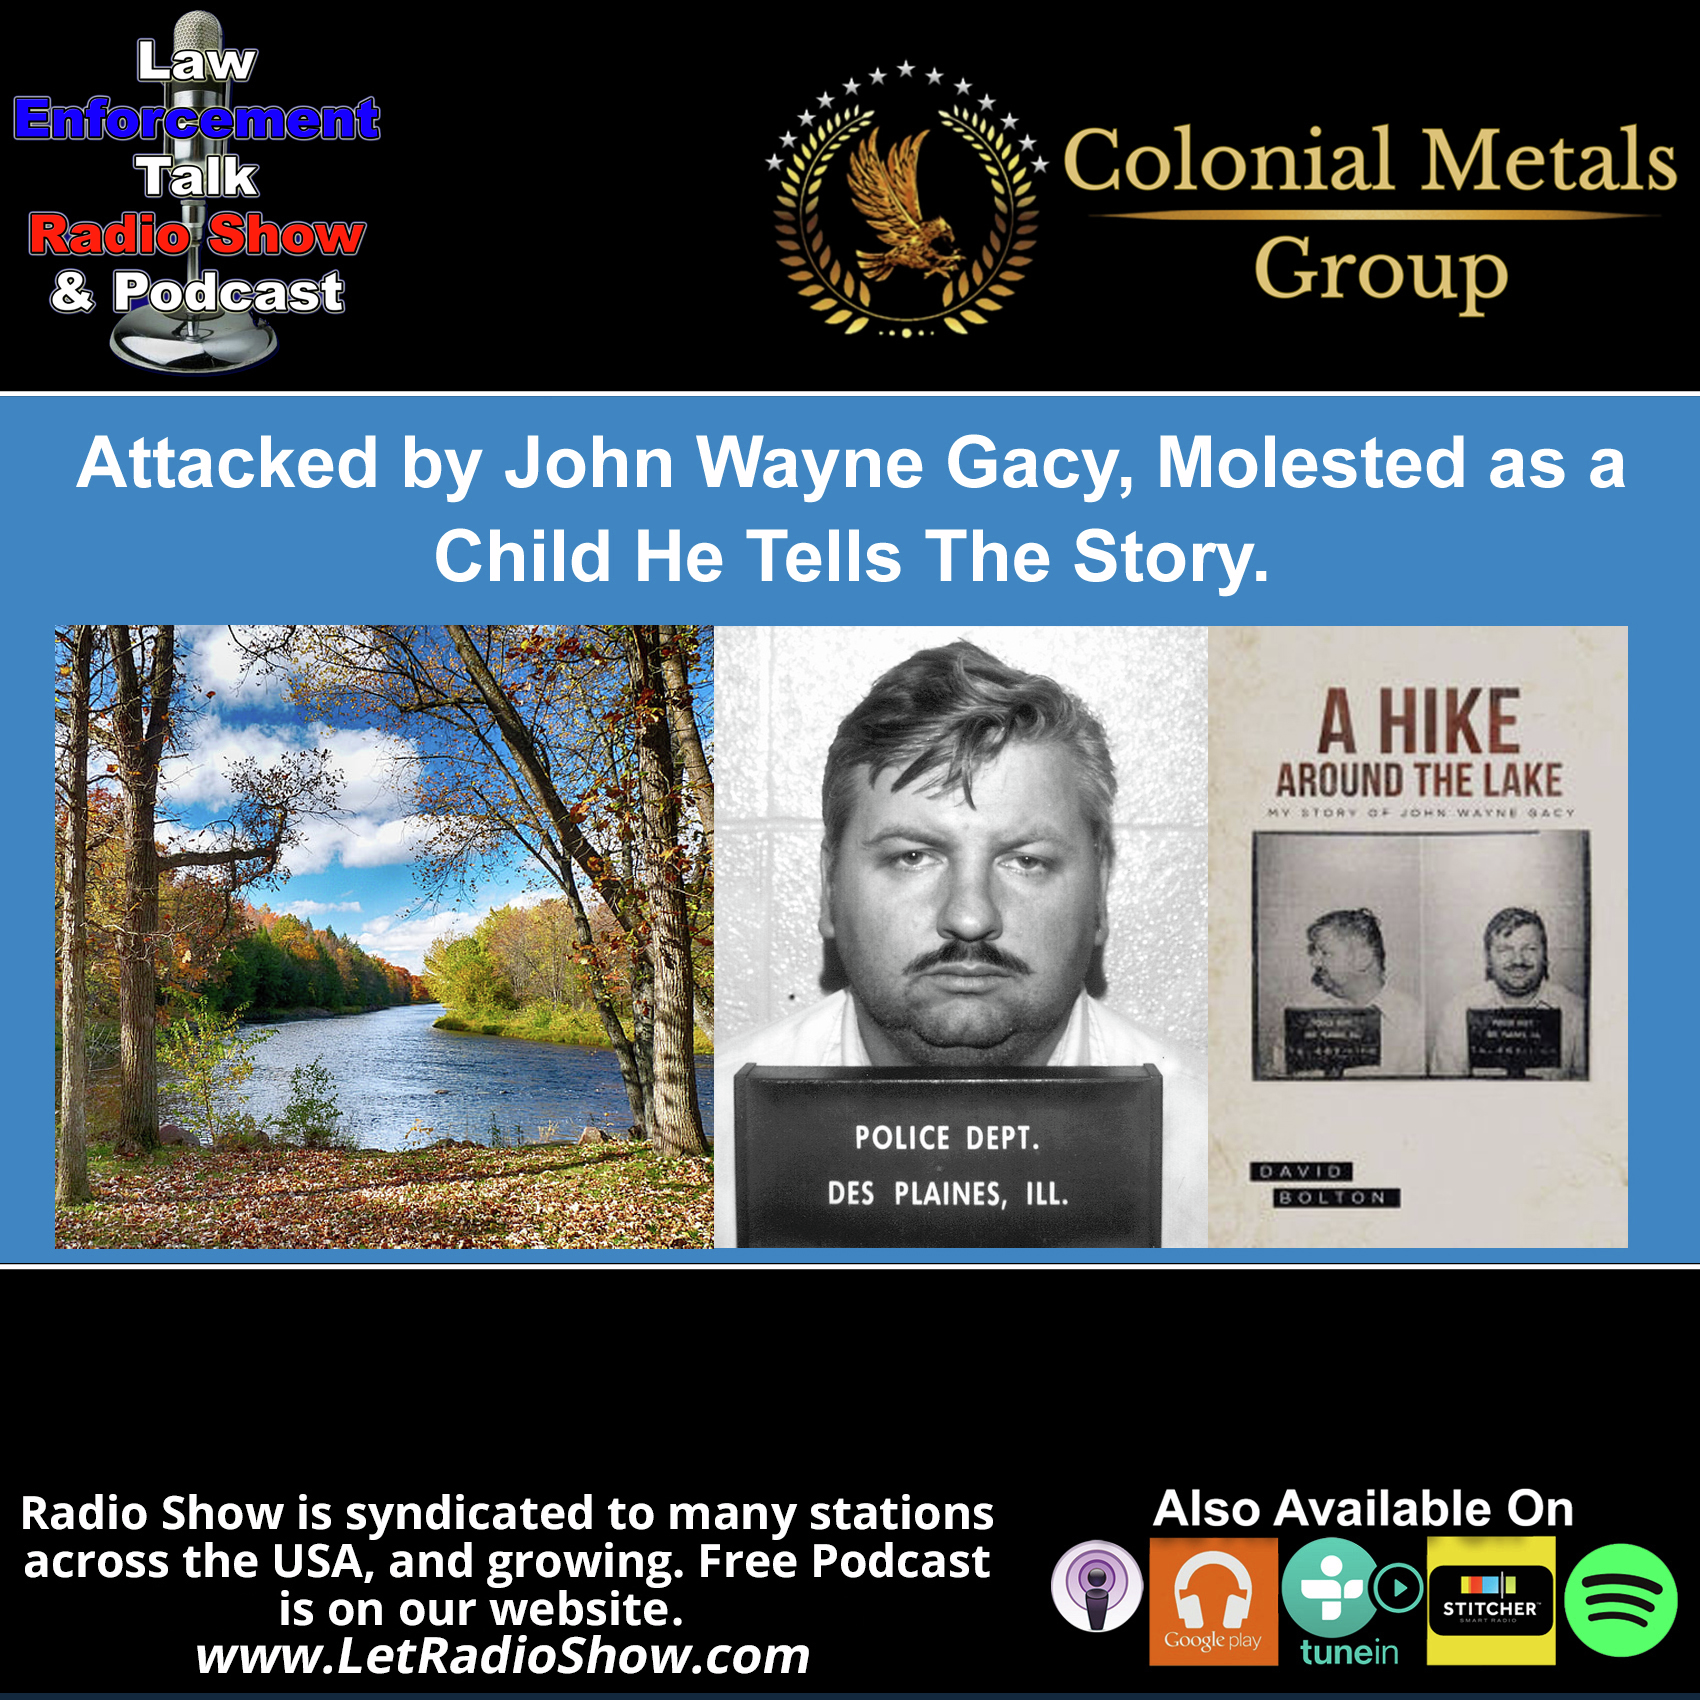 Attacked by John Wayne Gacy, Molested as a Child He Tells The Story